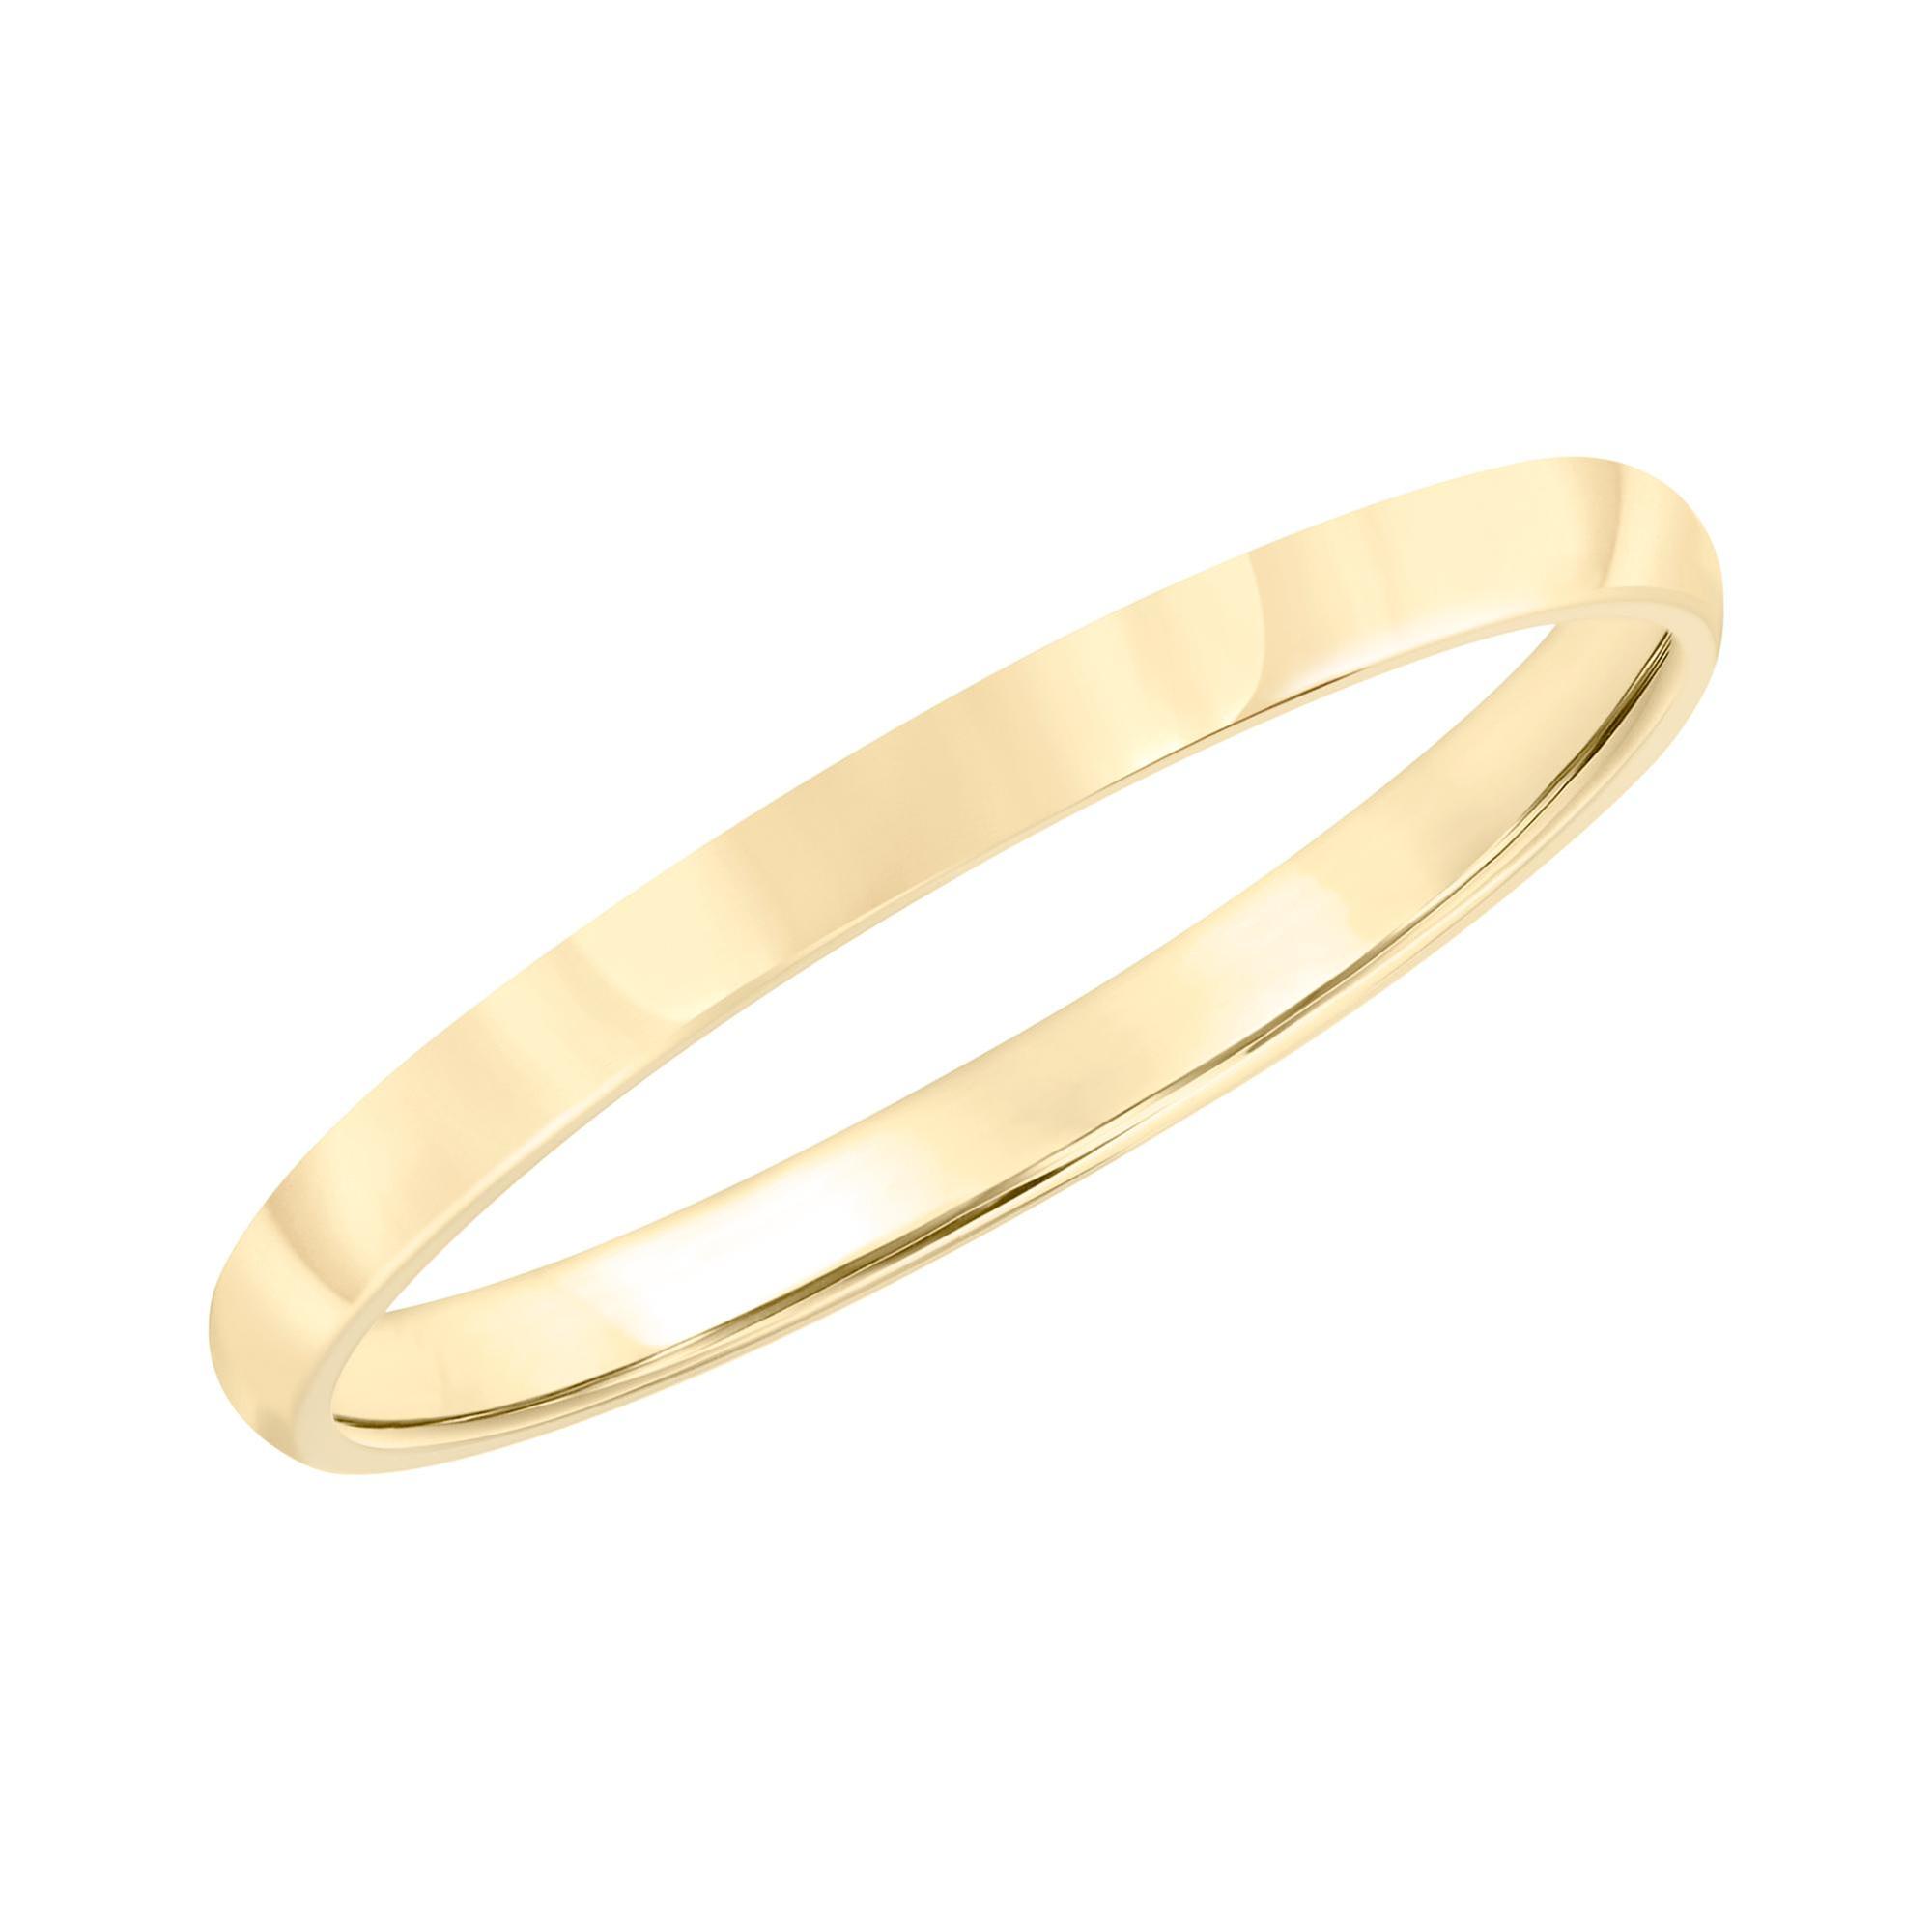 Super Low Dome 10k Yellow Gold Wedding Band 2mm - Size 7